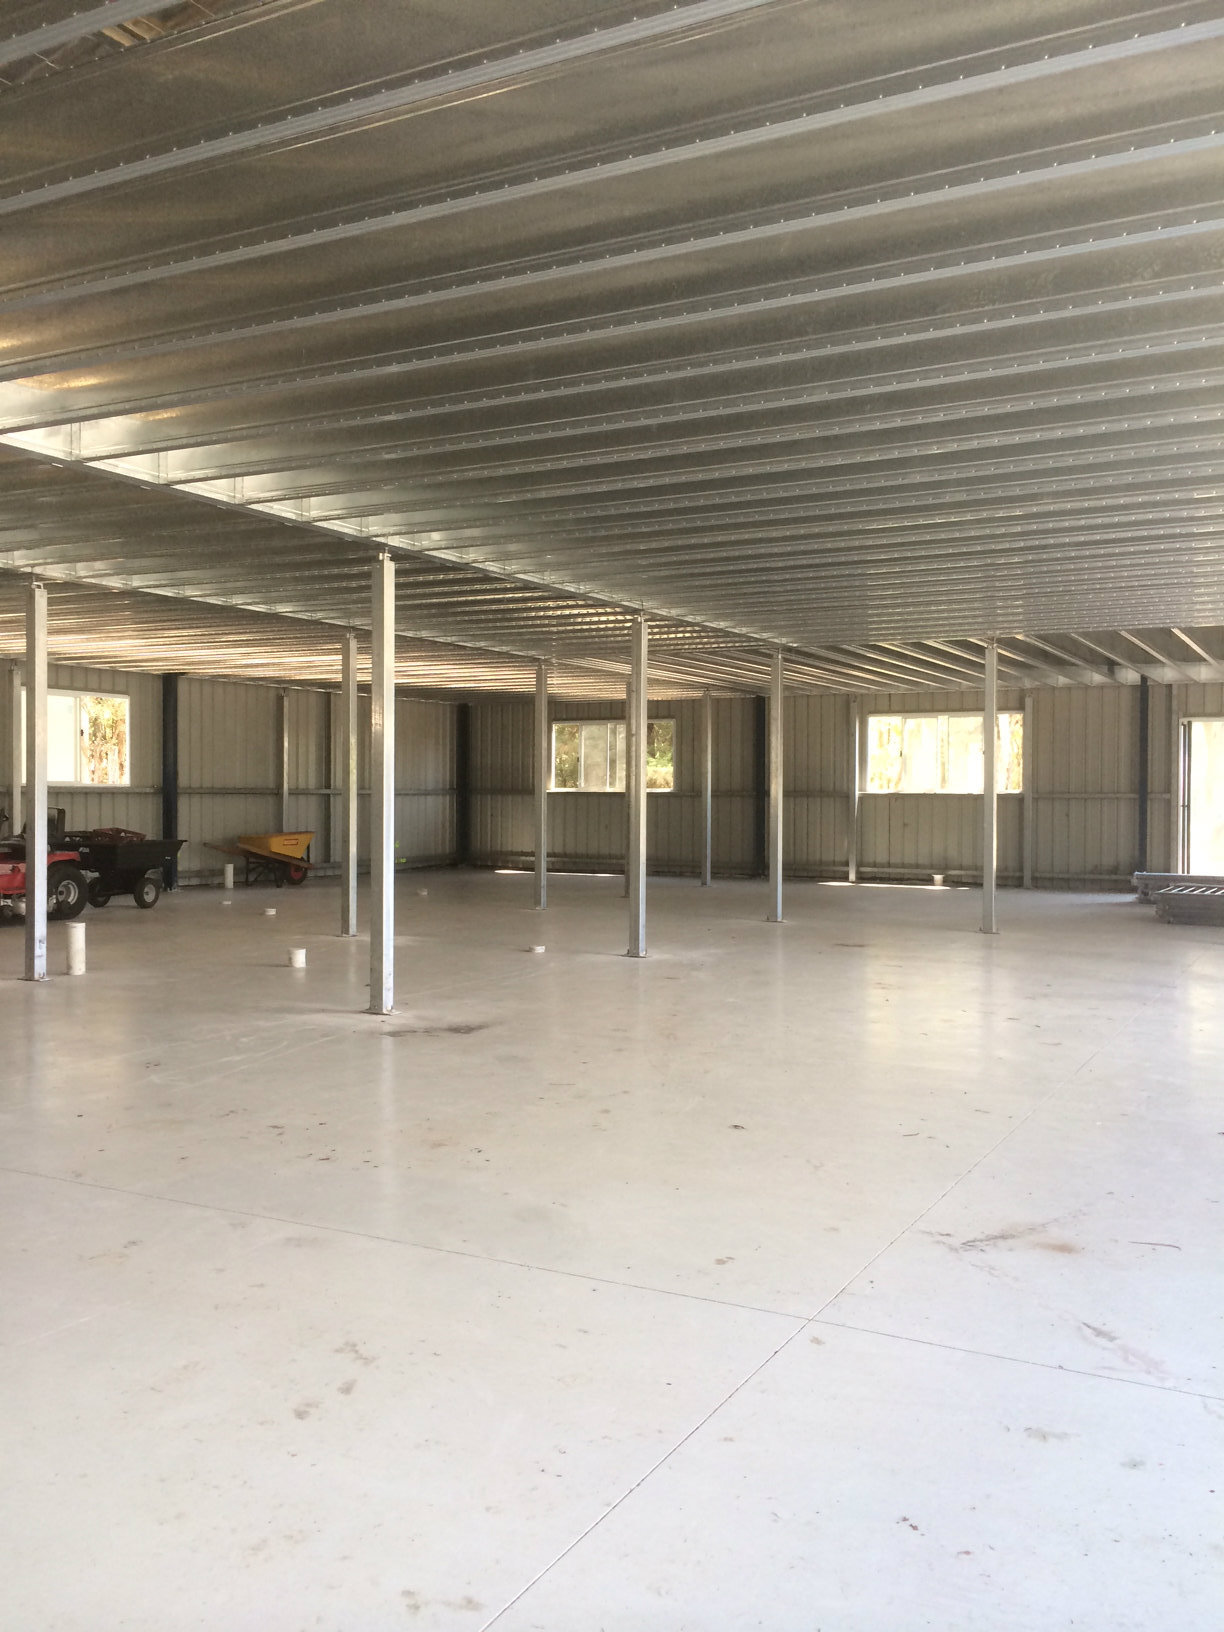 Boxspan mezzanine floor frame providing storage space in a shed